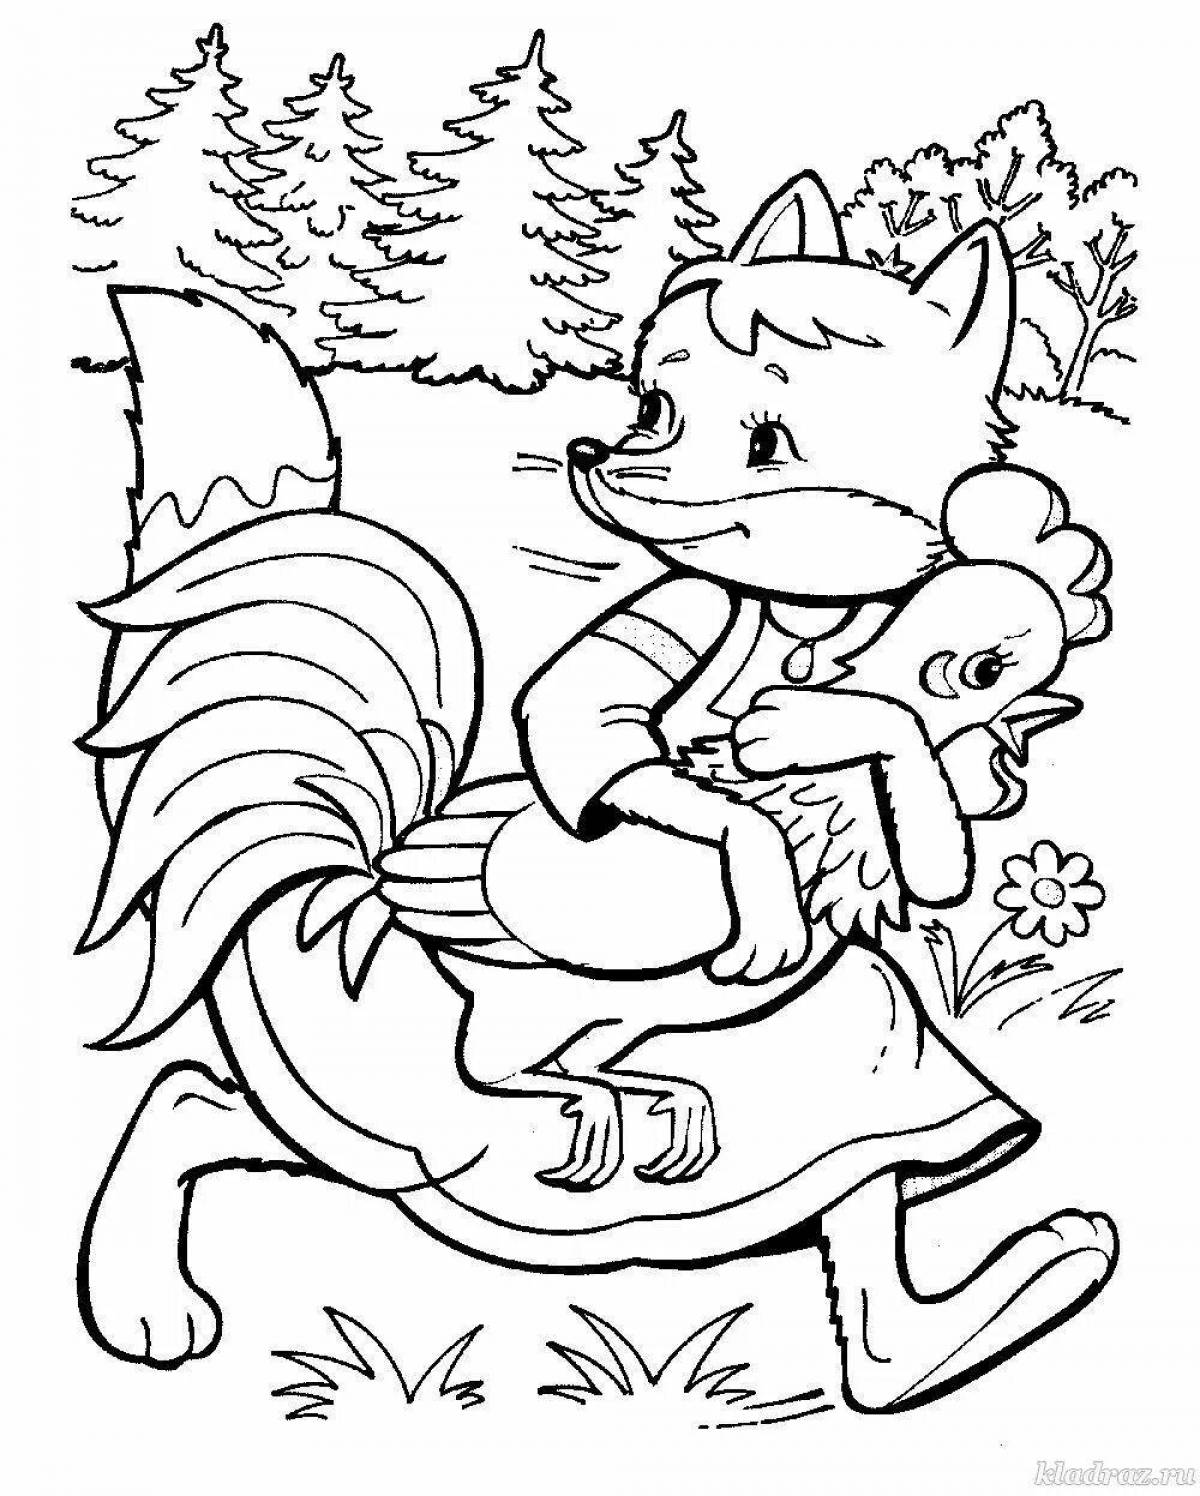 Fun coloring fox and rooster Russian folk tale